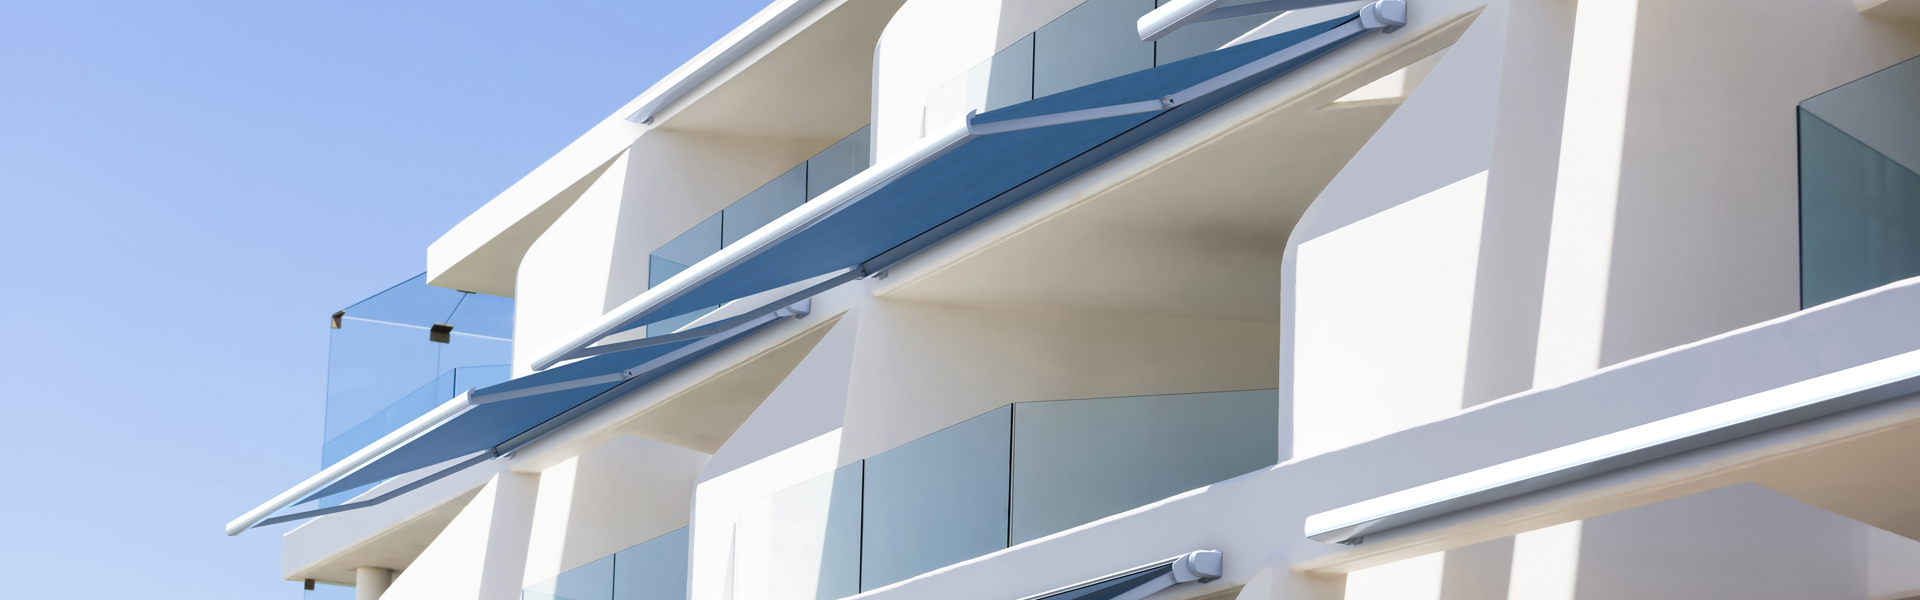 Closeup modern white apartment building with glass balcony against blue sky, full frame horizontal composition with copy space